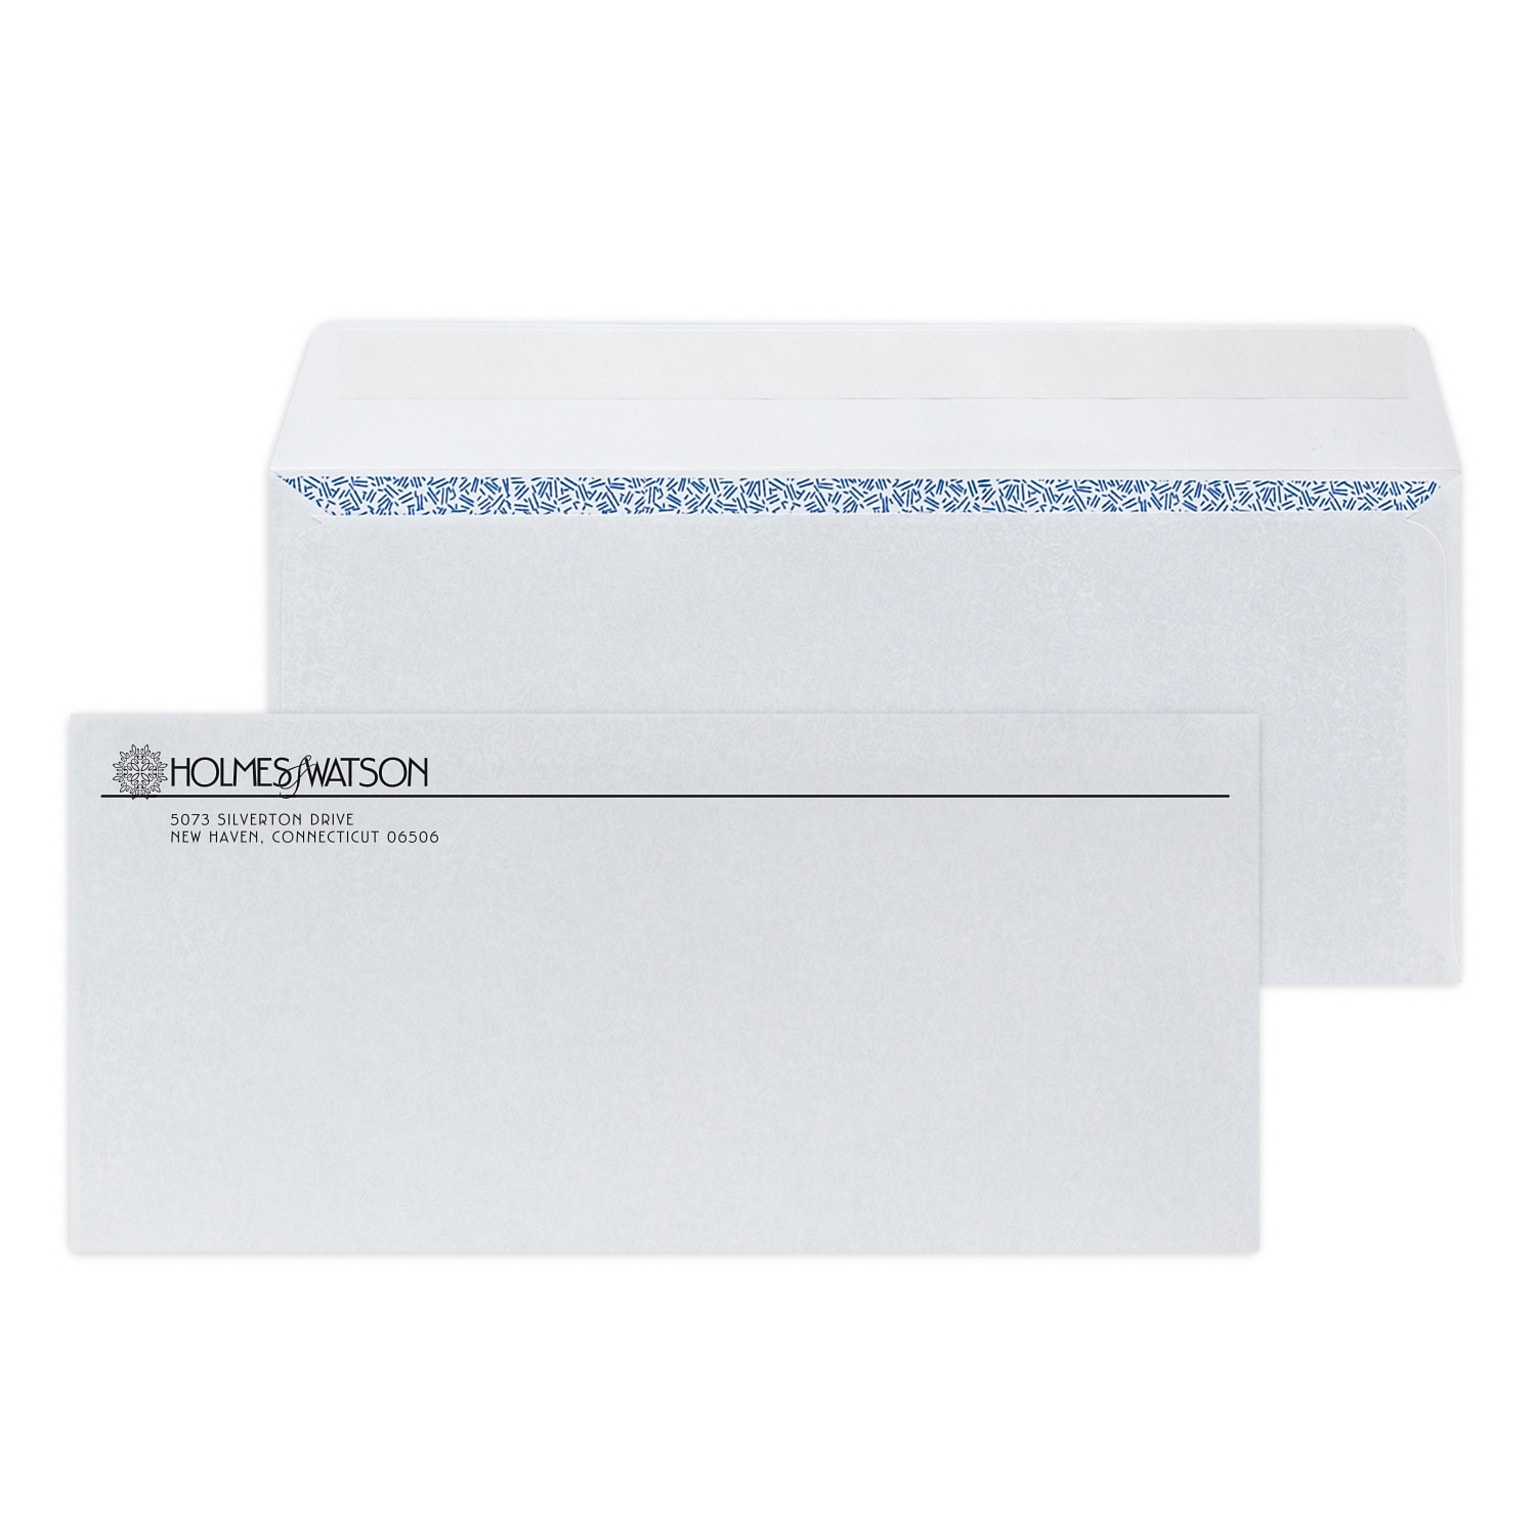 Custom #10 Barcode Peel and Seal Envelopes with Security Tint, 4 1/4 x 9 1/2, 24# White Wove, 1 Standard Ink, 250 / Pack